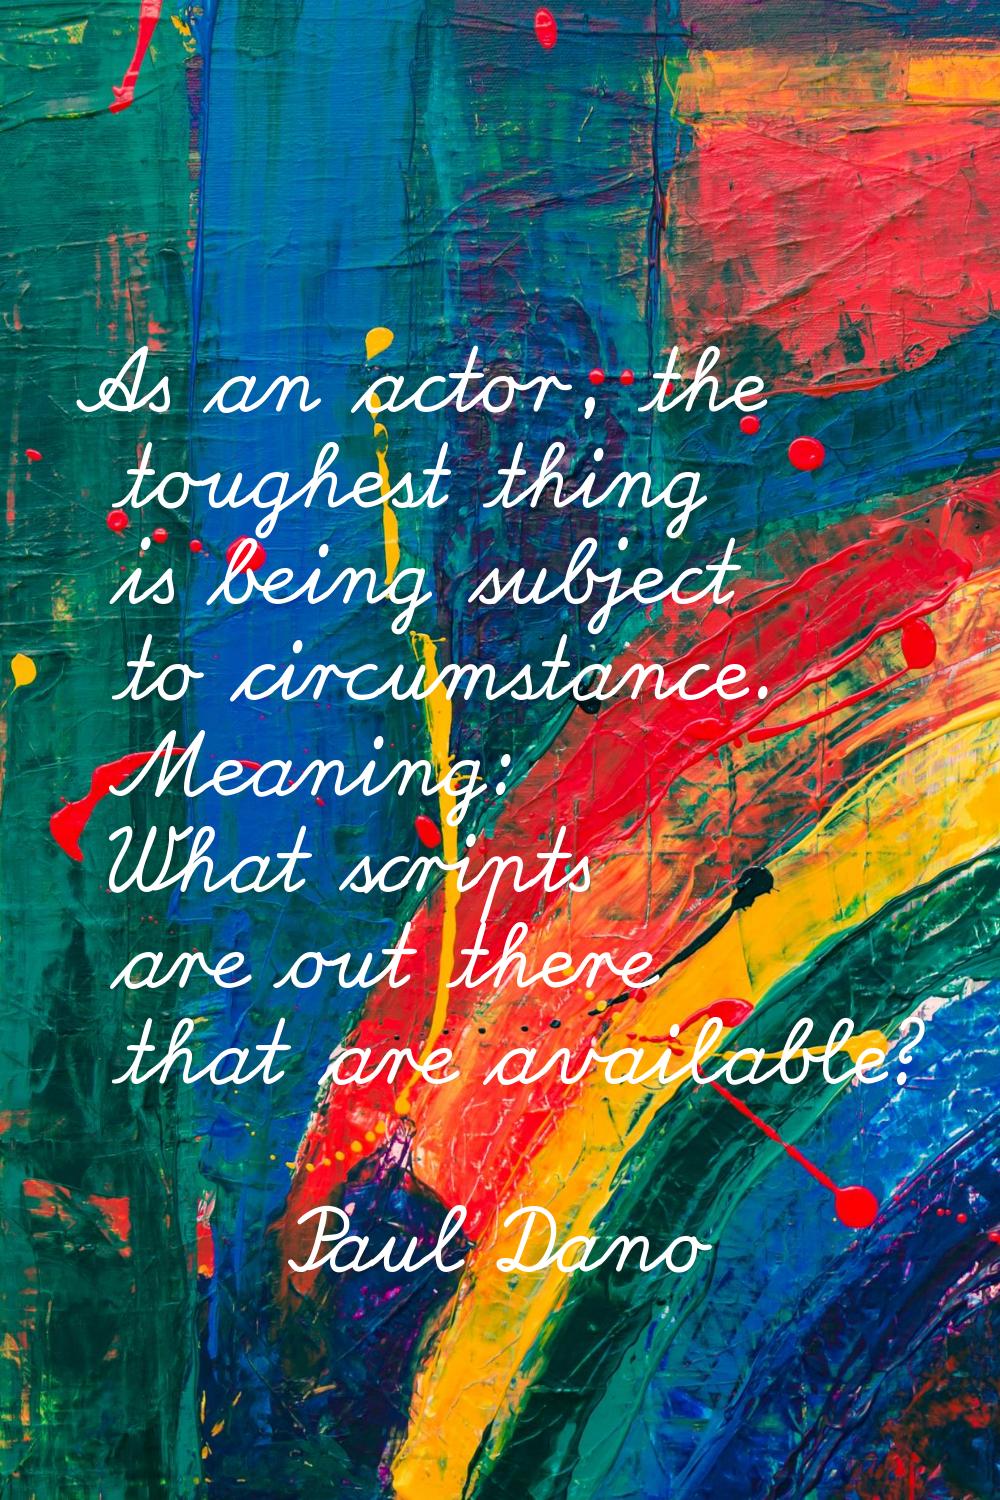 As an actor, the toughest thing is being subject to circumstance. Meaning: What scripts are out the